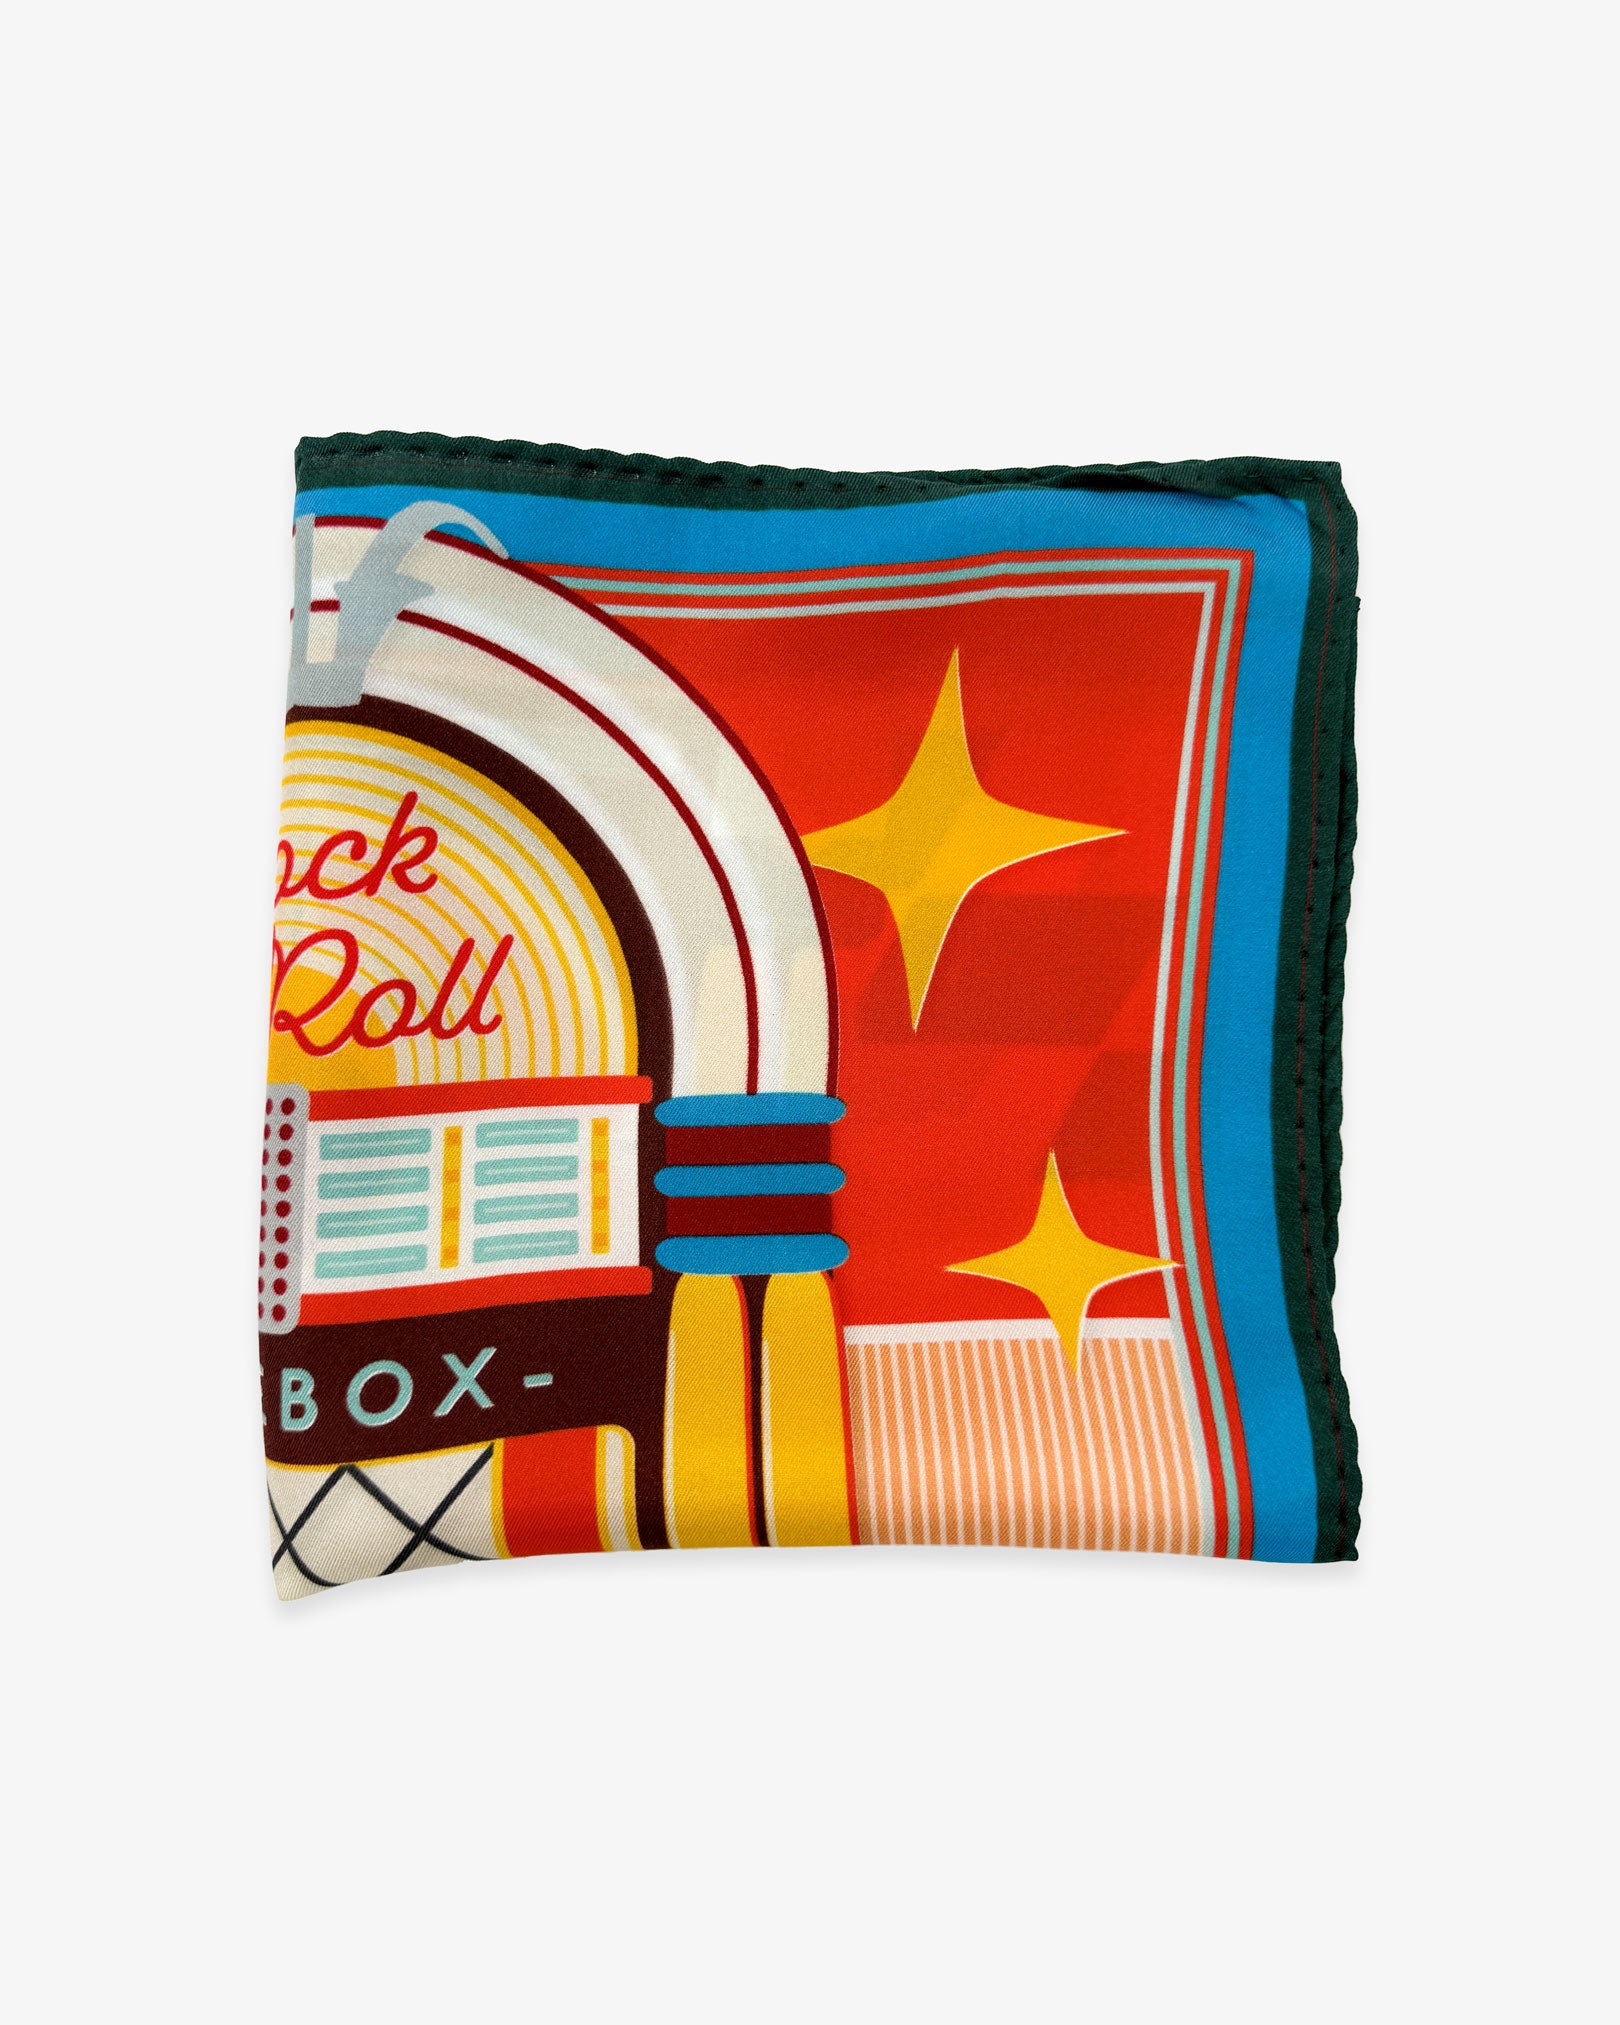 The 'Jukebox' silk pocket square from SOHO Scarves folded into a quarter, showing a portion of the iconic 1950's jukebox illustration blue and black border.